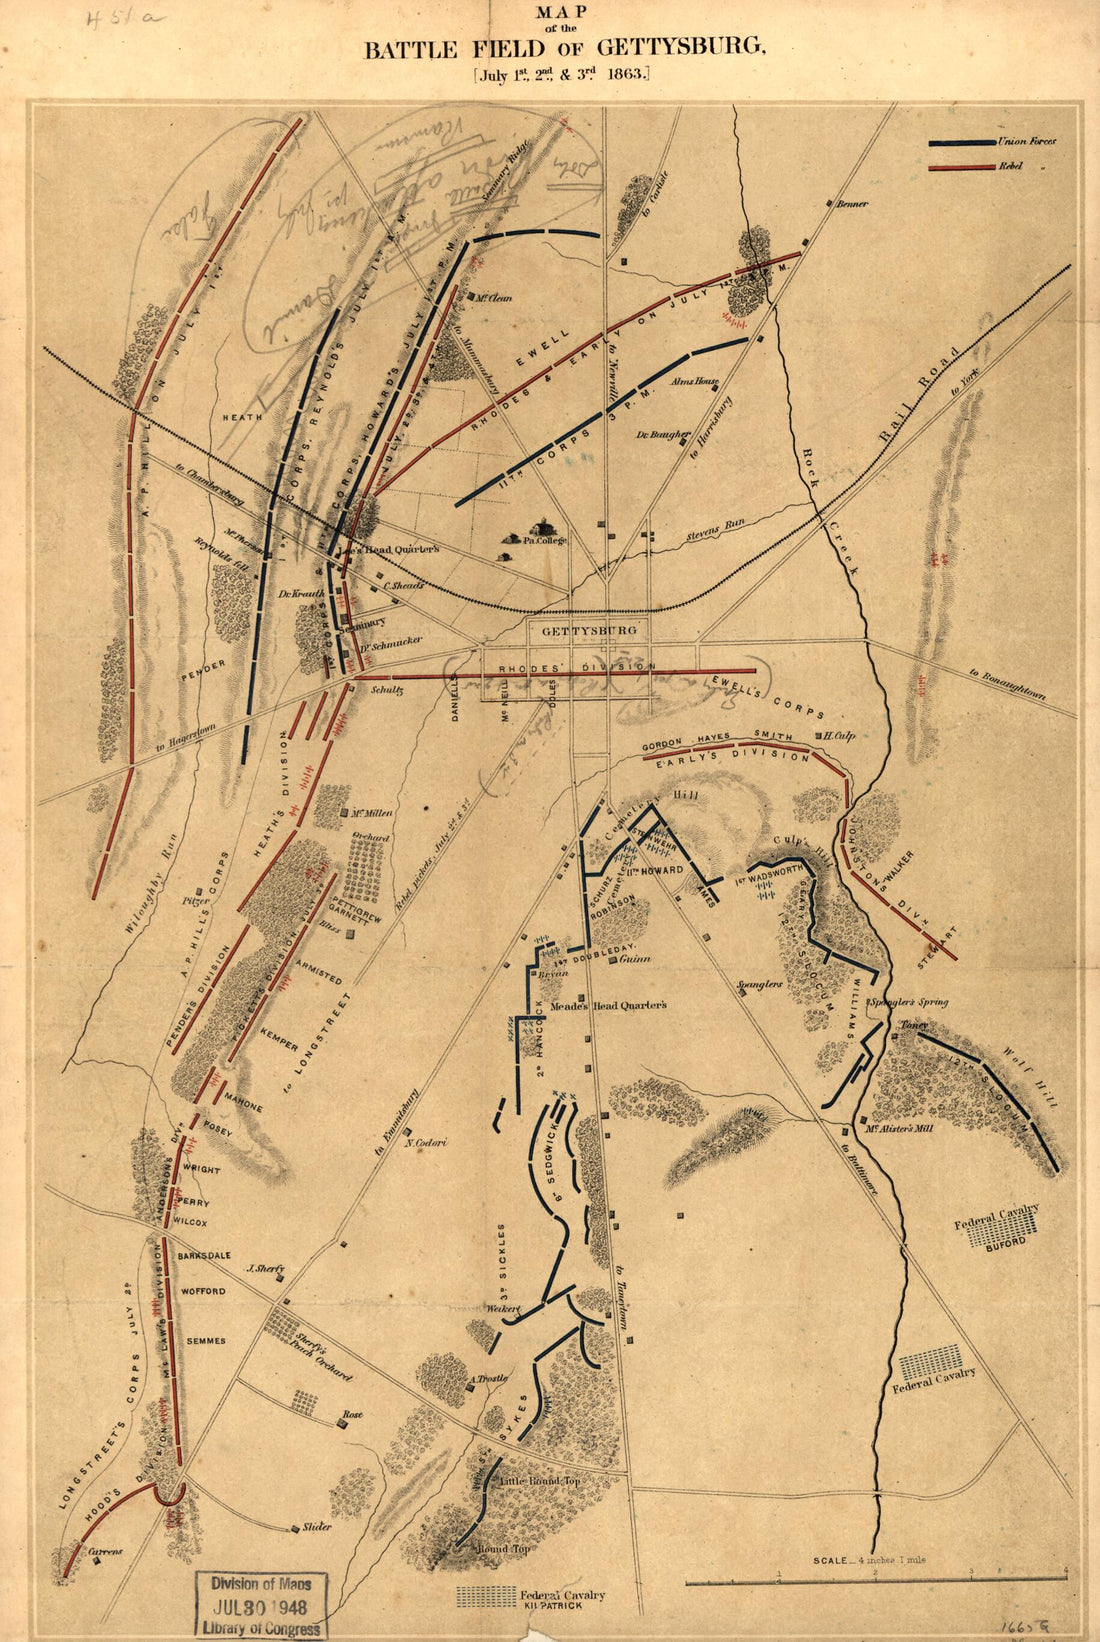 This old map of Map of the Battle Field of Gettysburg. July 1st, 2nd, and 3rd from 1863 was created by  J.B. Lippincott Company in 1863